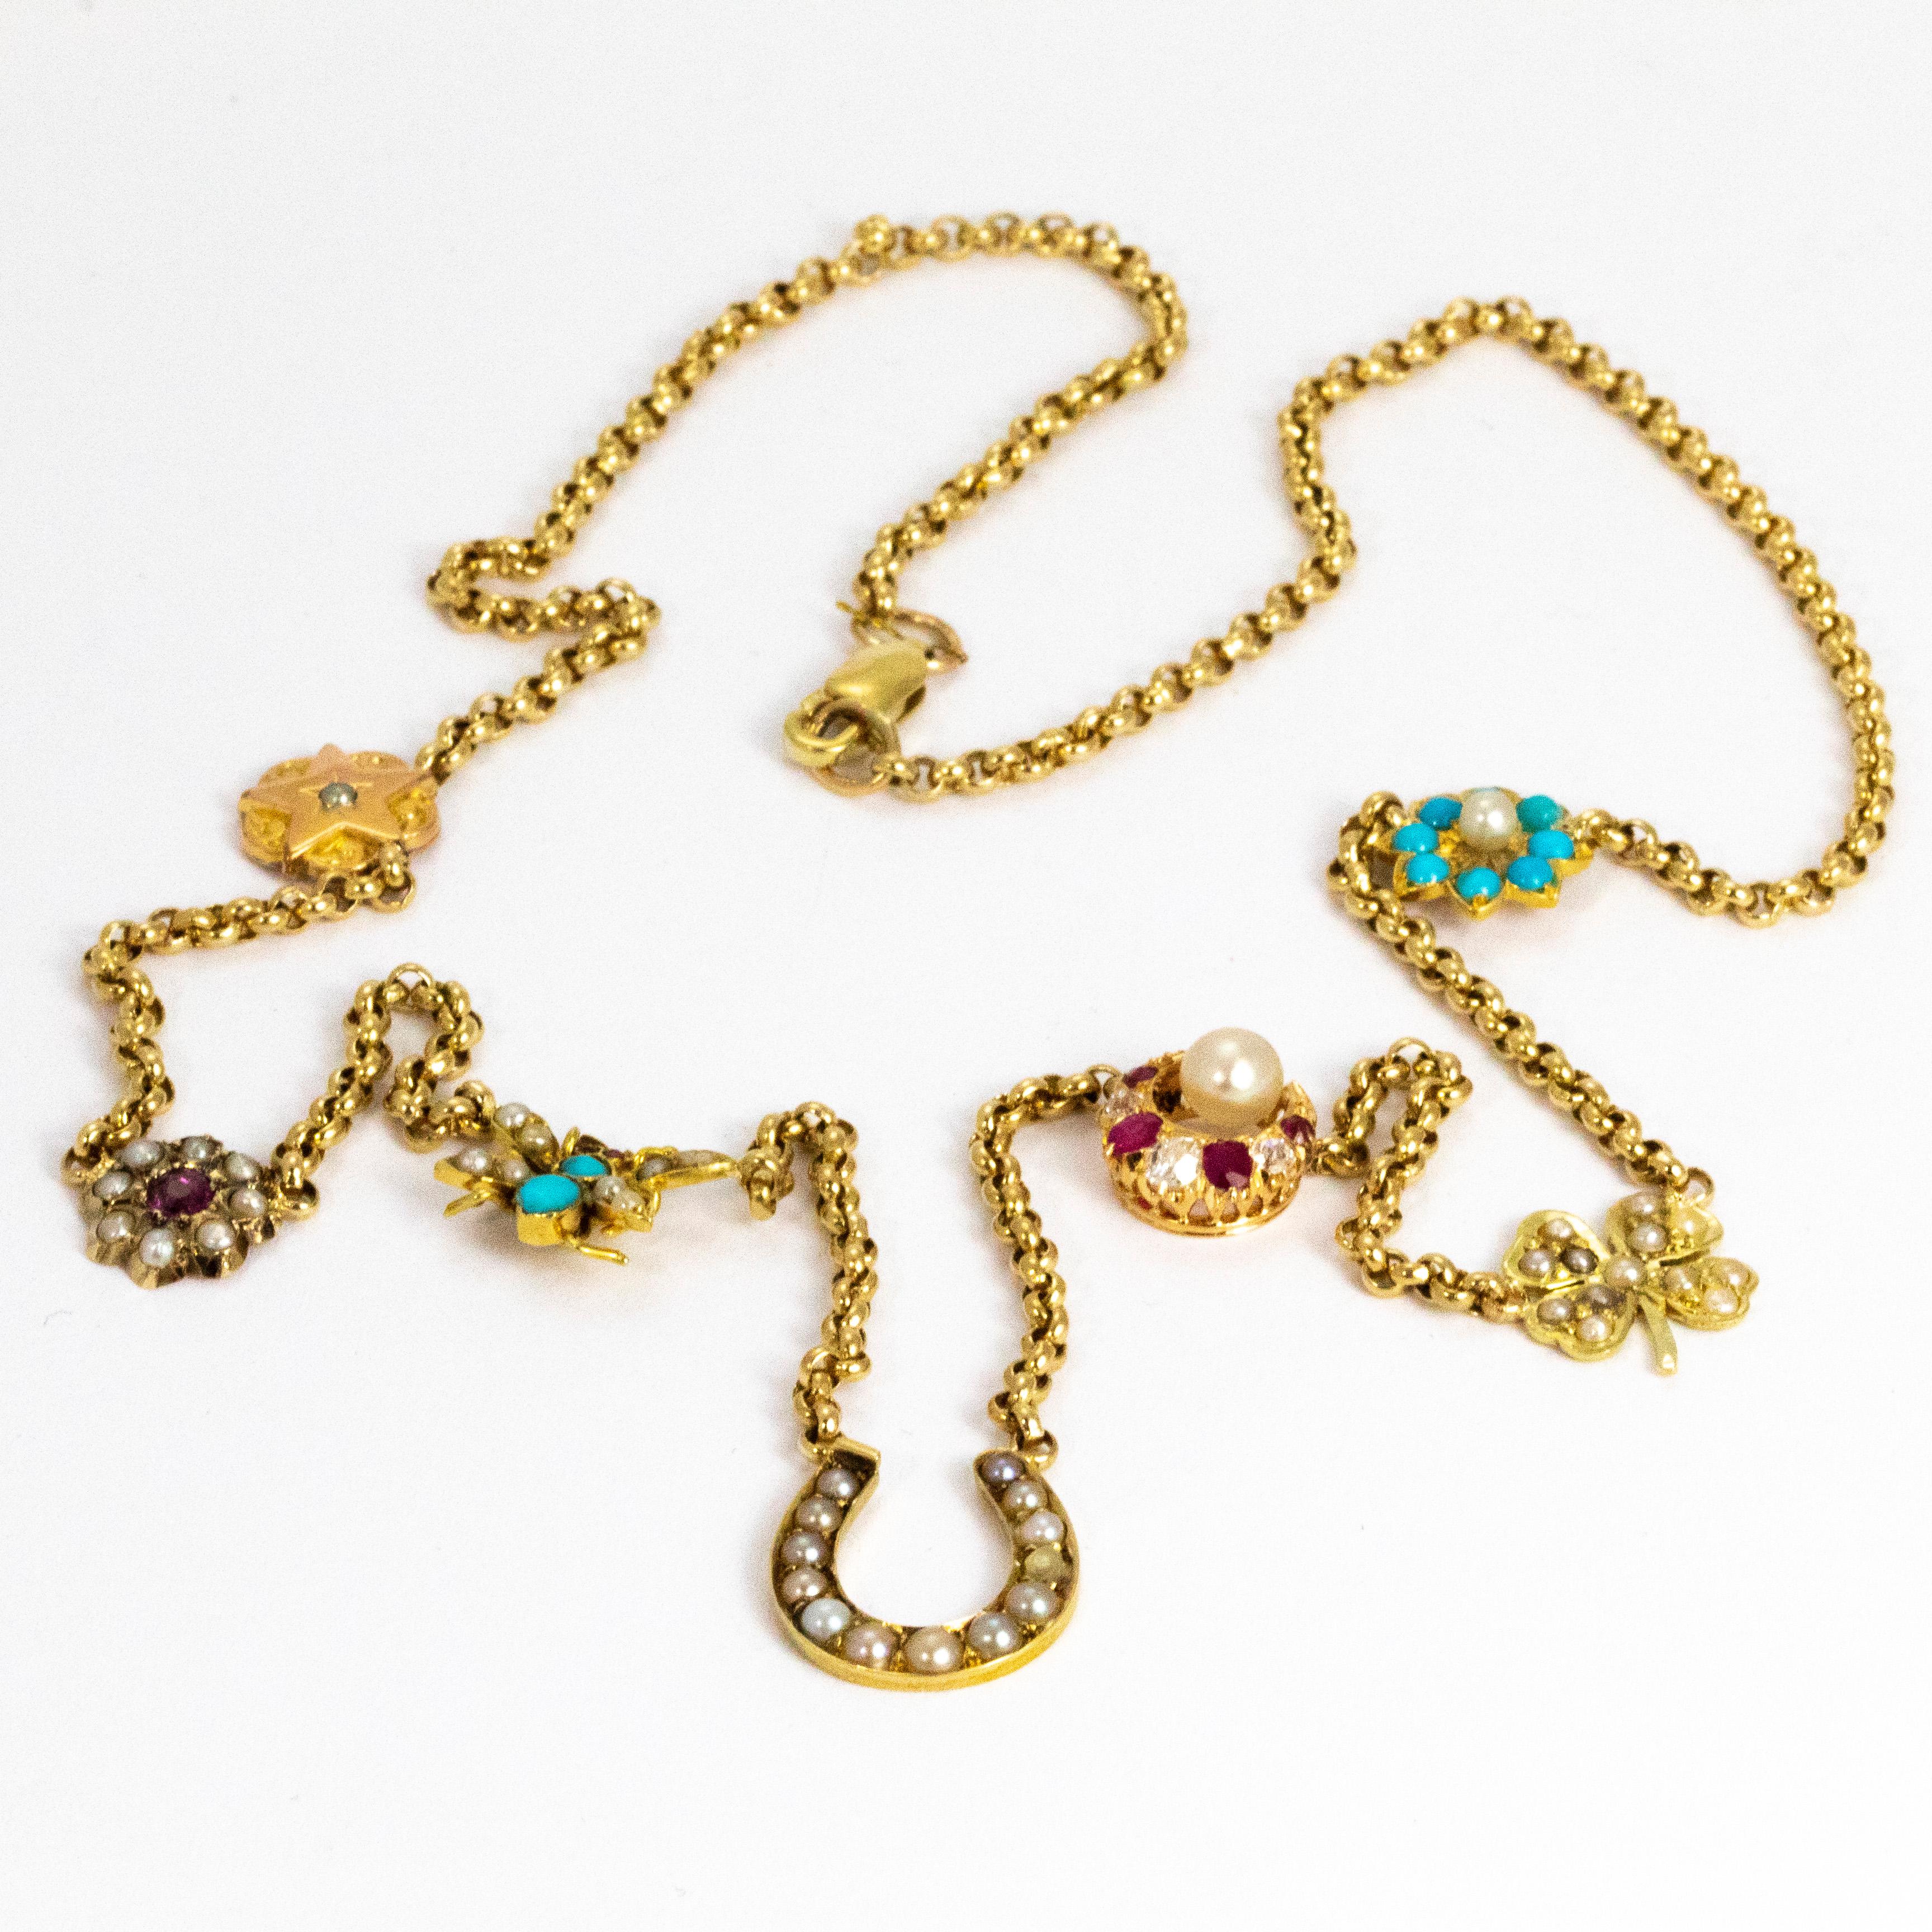 This necklace holds so many treats! Seven charms are placed around this necklace in total. A glossy gold star featuring a pearl at the centre, a ruby at the centre of a pearl cluster, the sweetest butterfly set with turquoise and pearl, a lucky